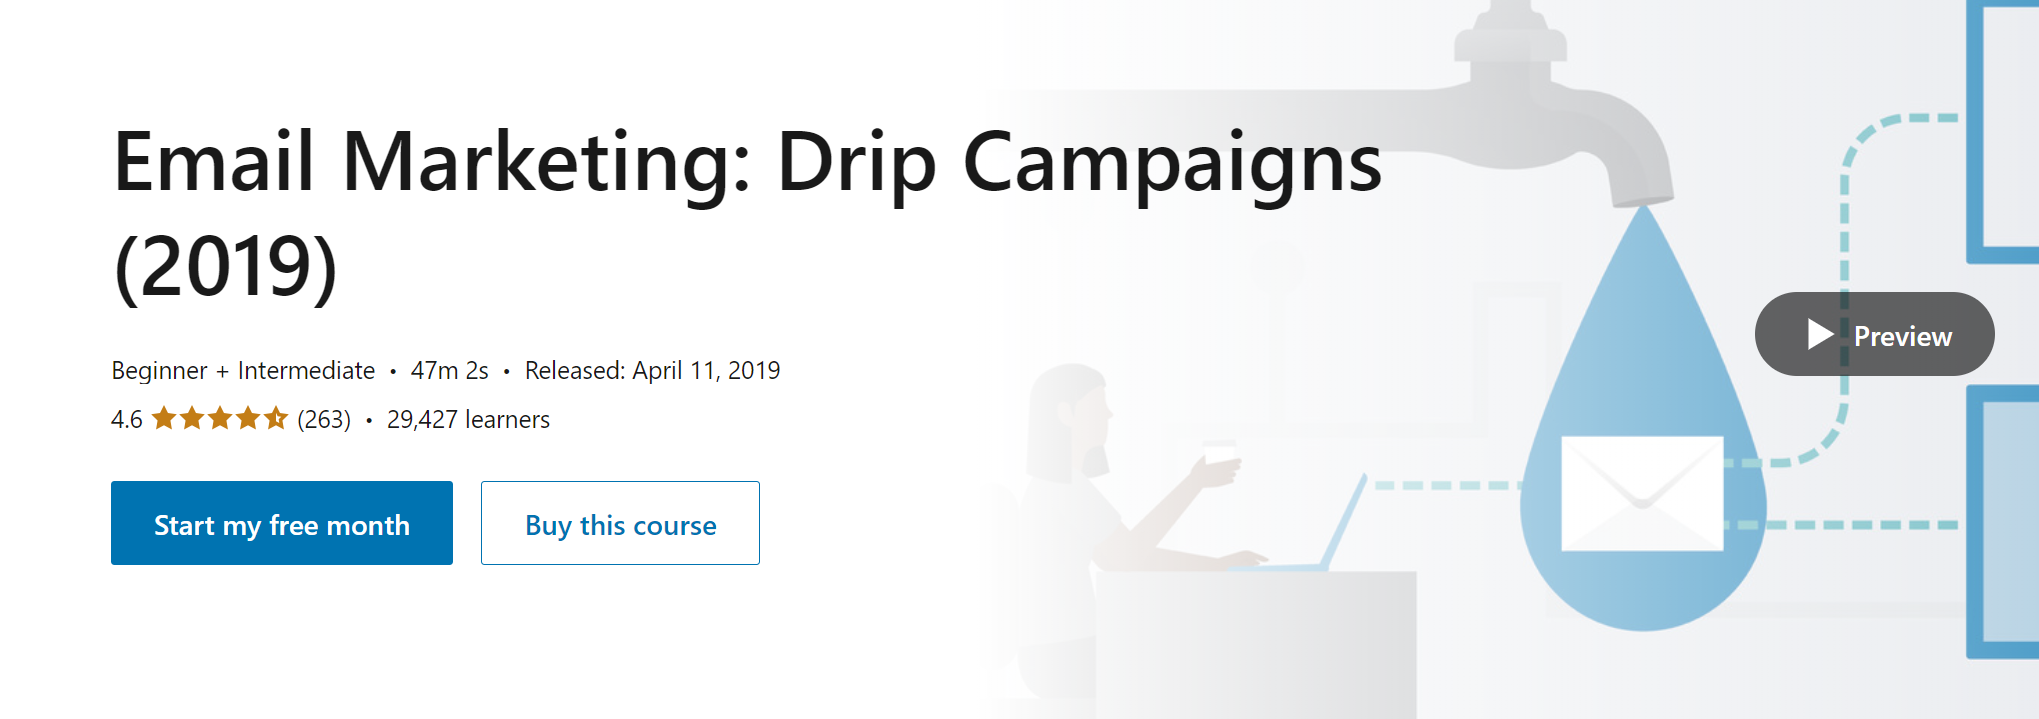 Email Marketing: Drip Campaigns (2019) via LinkedIn Learning